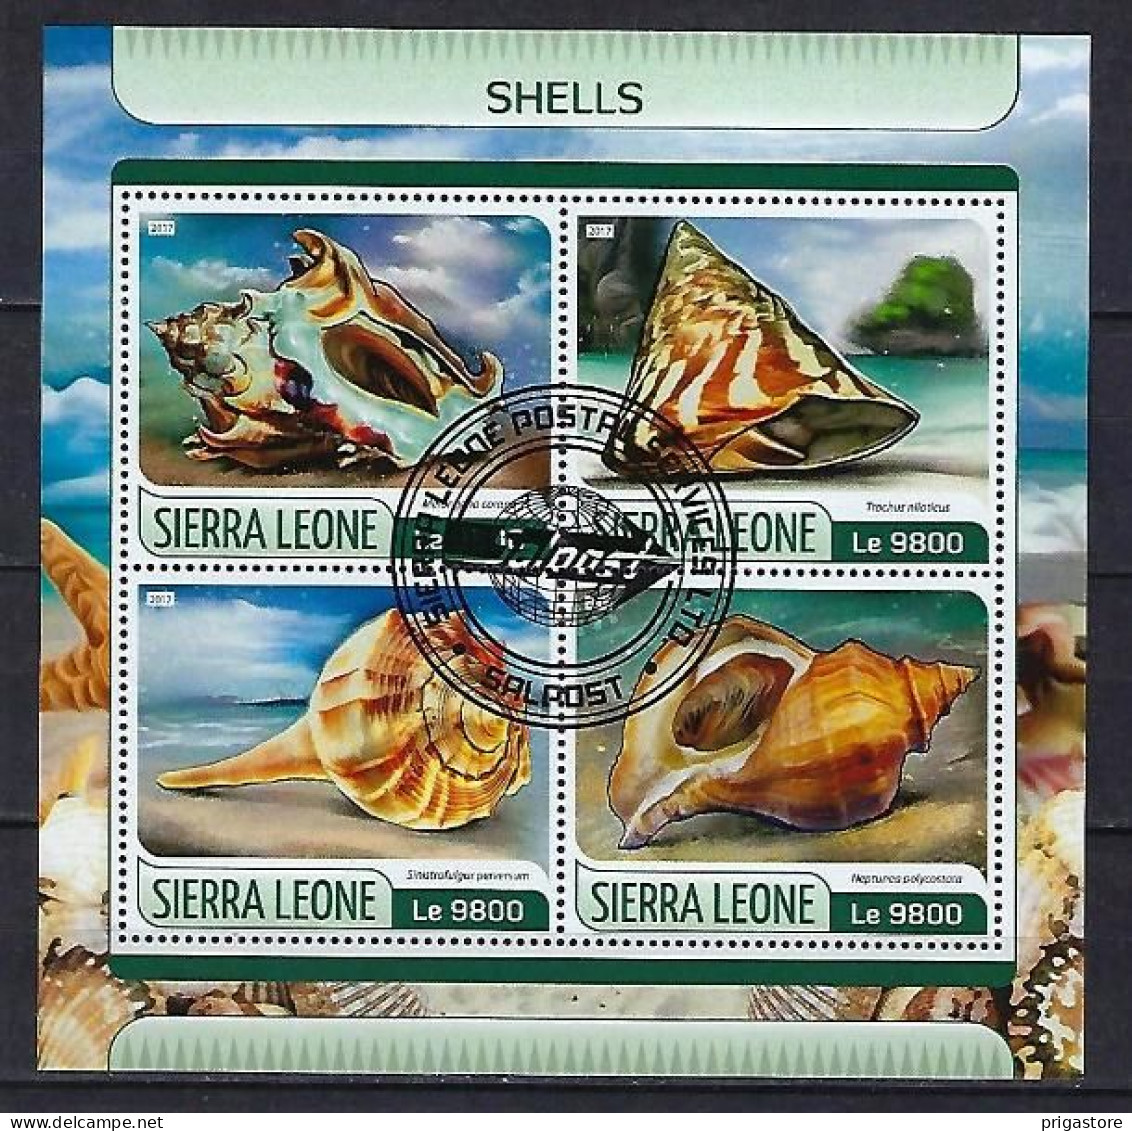 Coquillages Sierra Leone 2017 (408) Yvert 7013 à 7016 Oblitérés Used - Coquillages